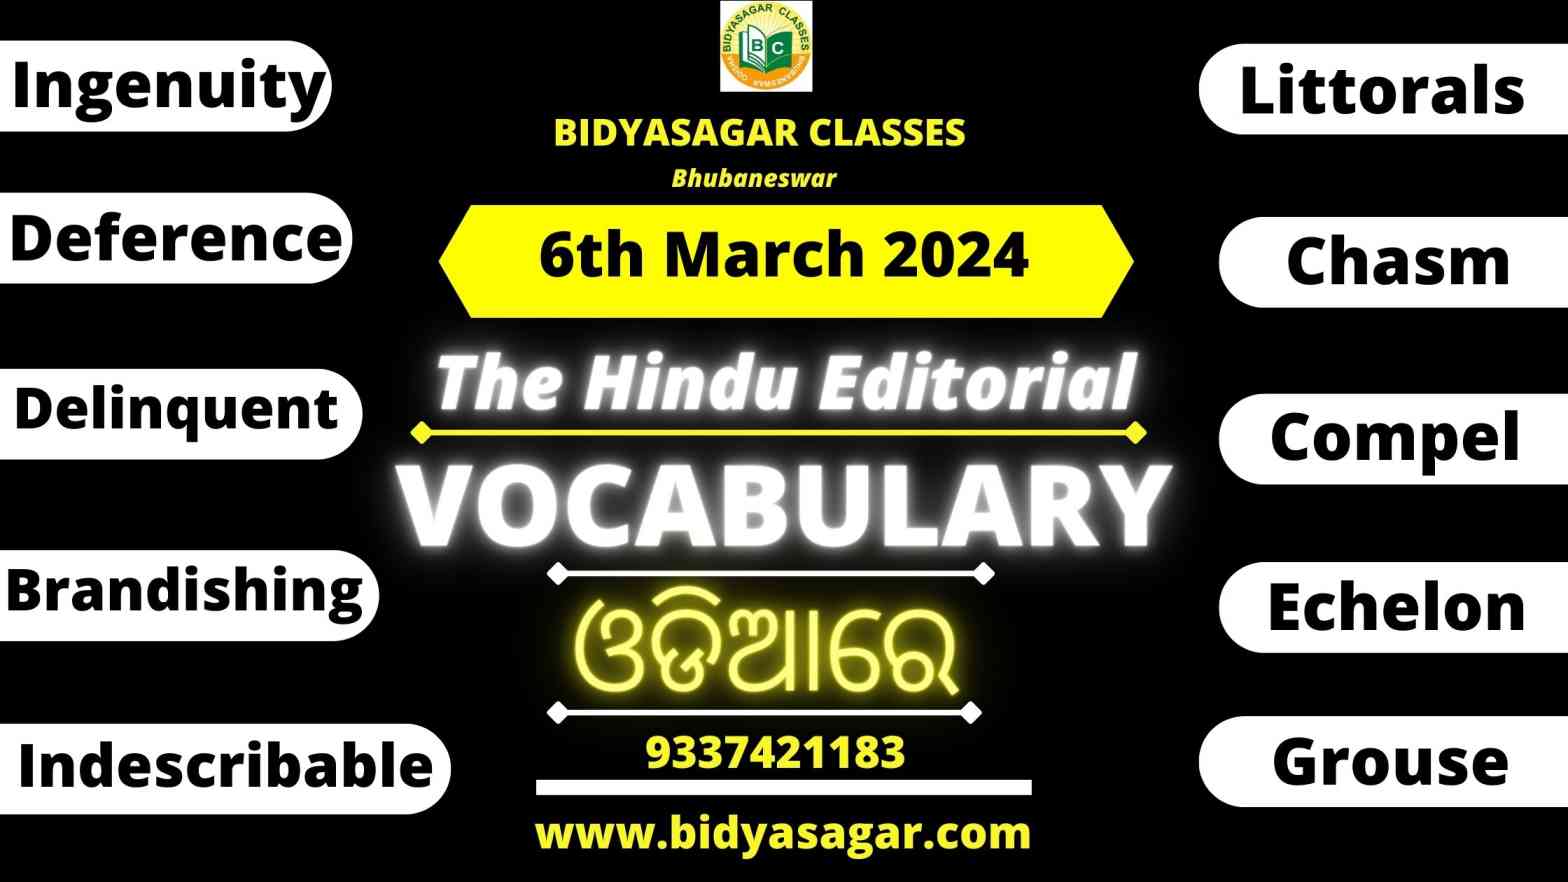 The Hindu Editorial Vocabulary of 6th March 2024